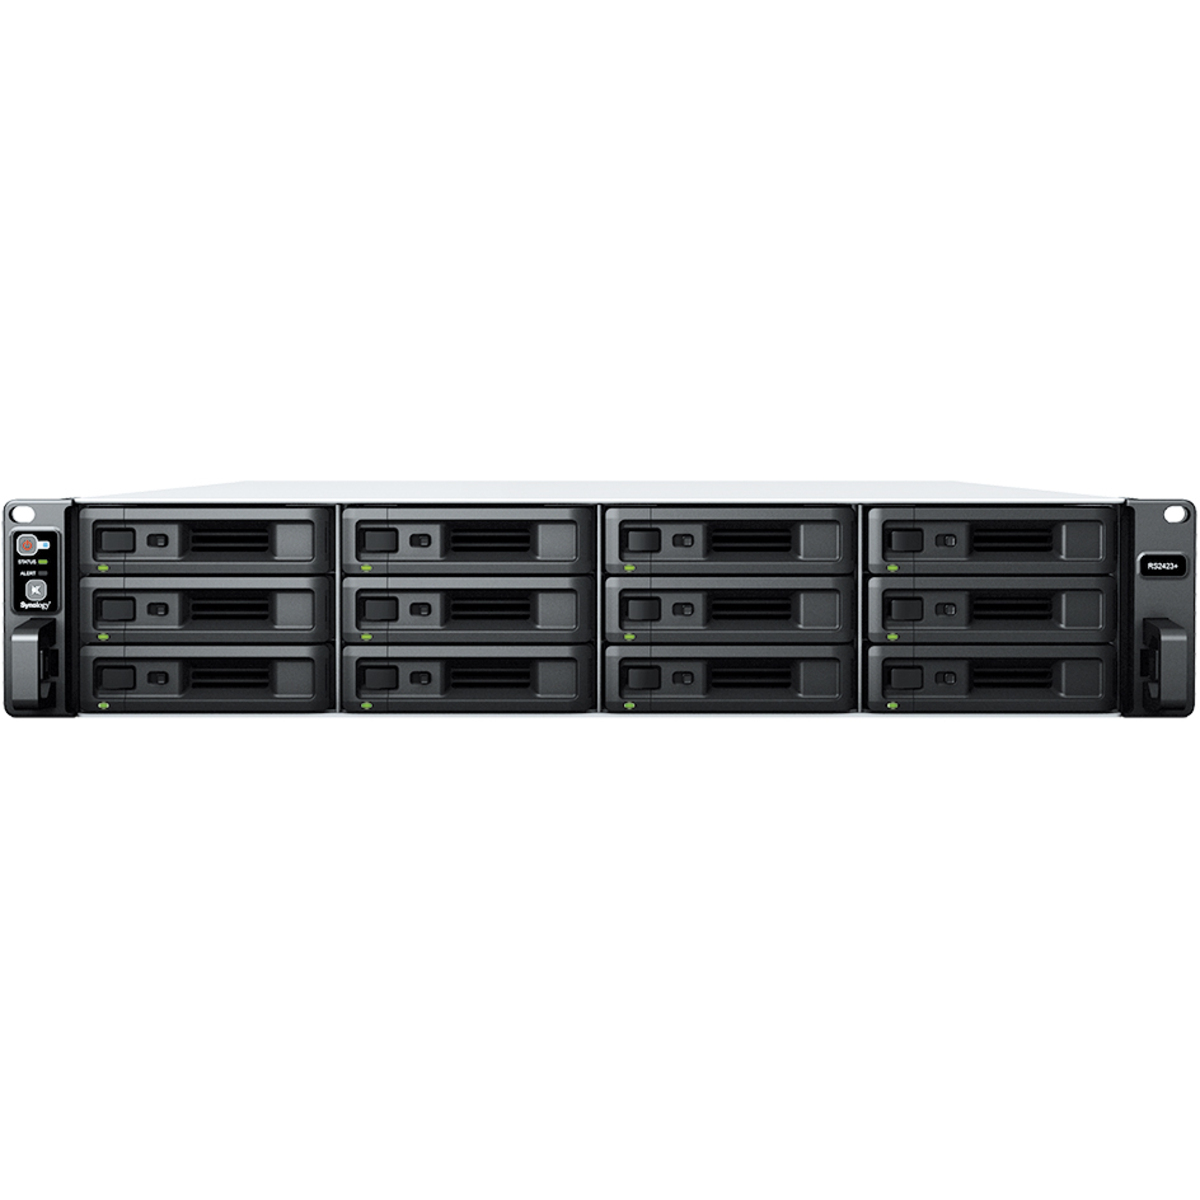 Synology RackStation RS2423+ 48tb 12-Bay RackMount Multimedia / Power User / Business NAS - Network Attached Storage Device 12x4tb Samsung 870 EVO MZ-77E4T0BAM 2.5 560/530MB/s SATA 6Gb/s SSD CONSUMER Class Drives Installed - Burn-In Tested - ON SALE RackStation RS2423+